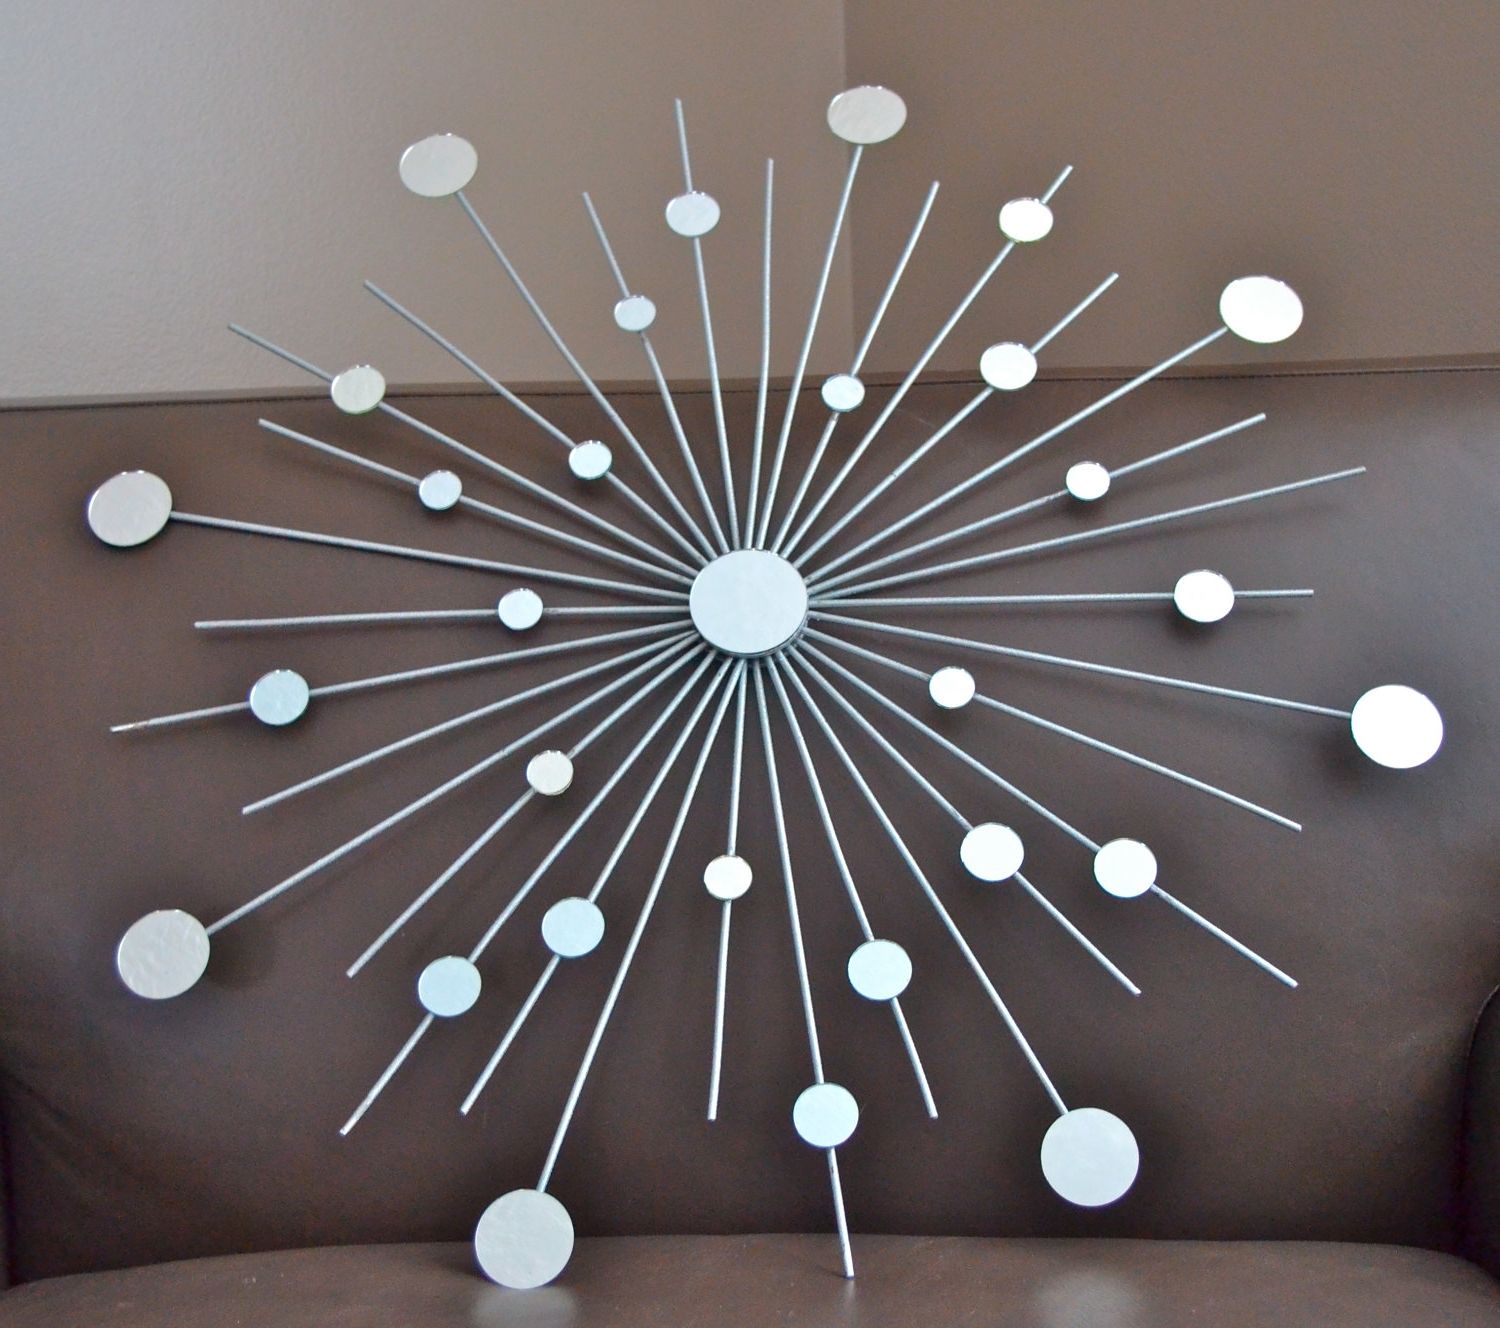 Most Recently Released Mirror Circles Wall Art Inside Decorative Round Wall Mirrors, Atomic Starburst Wall Decor Metal (View 9 of 15)